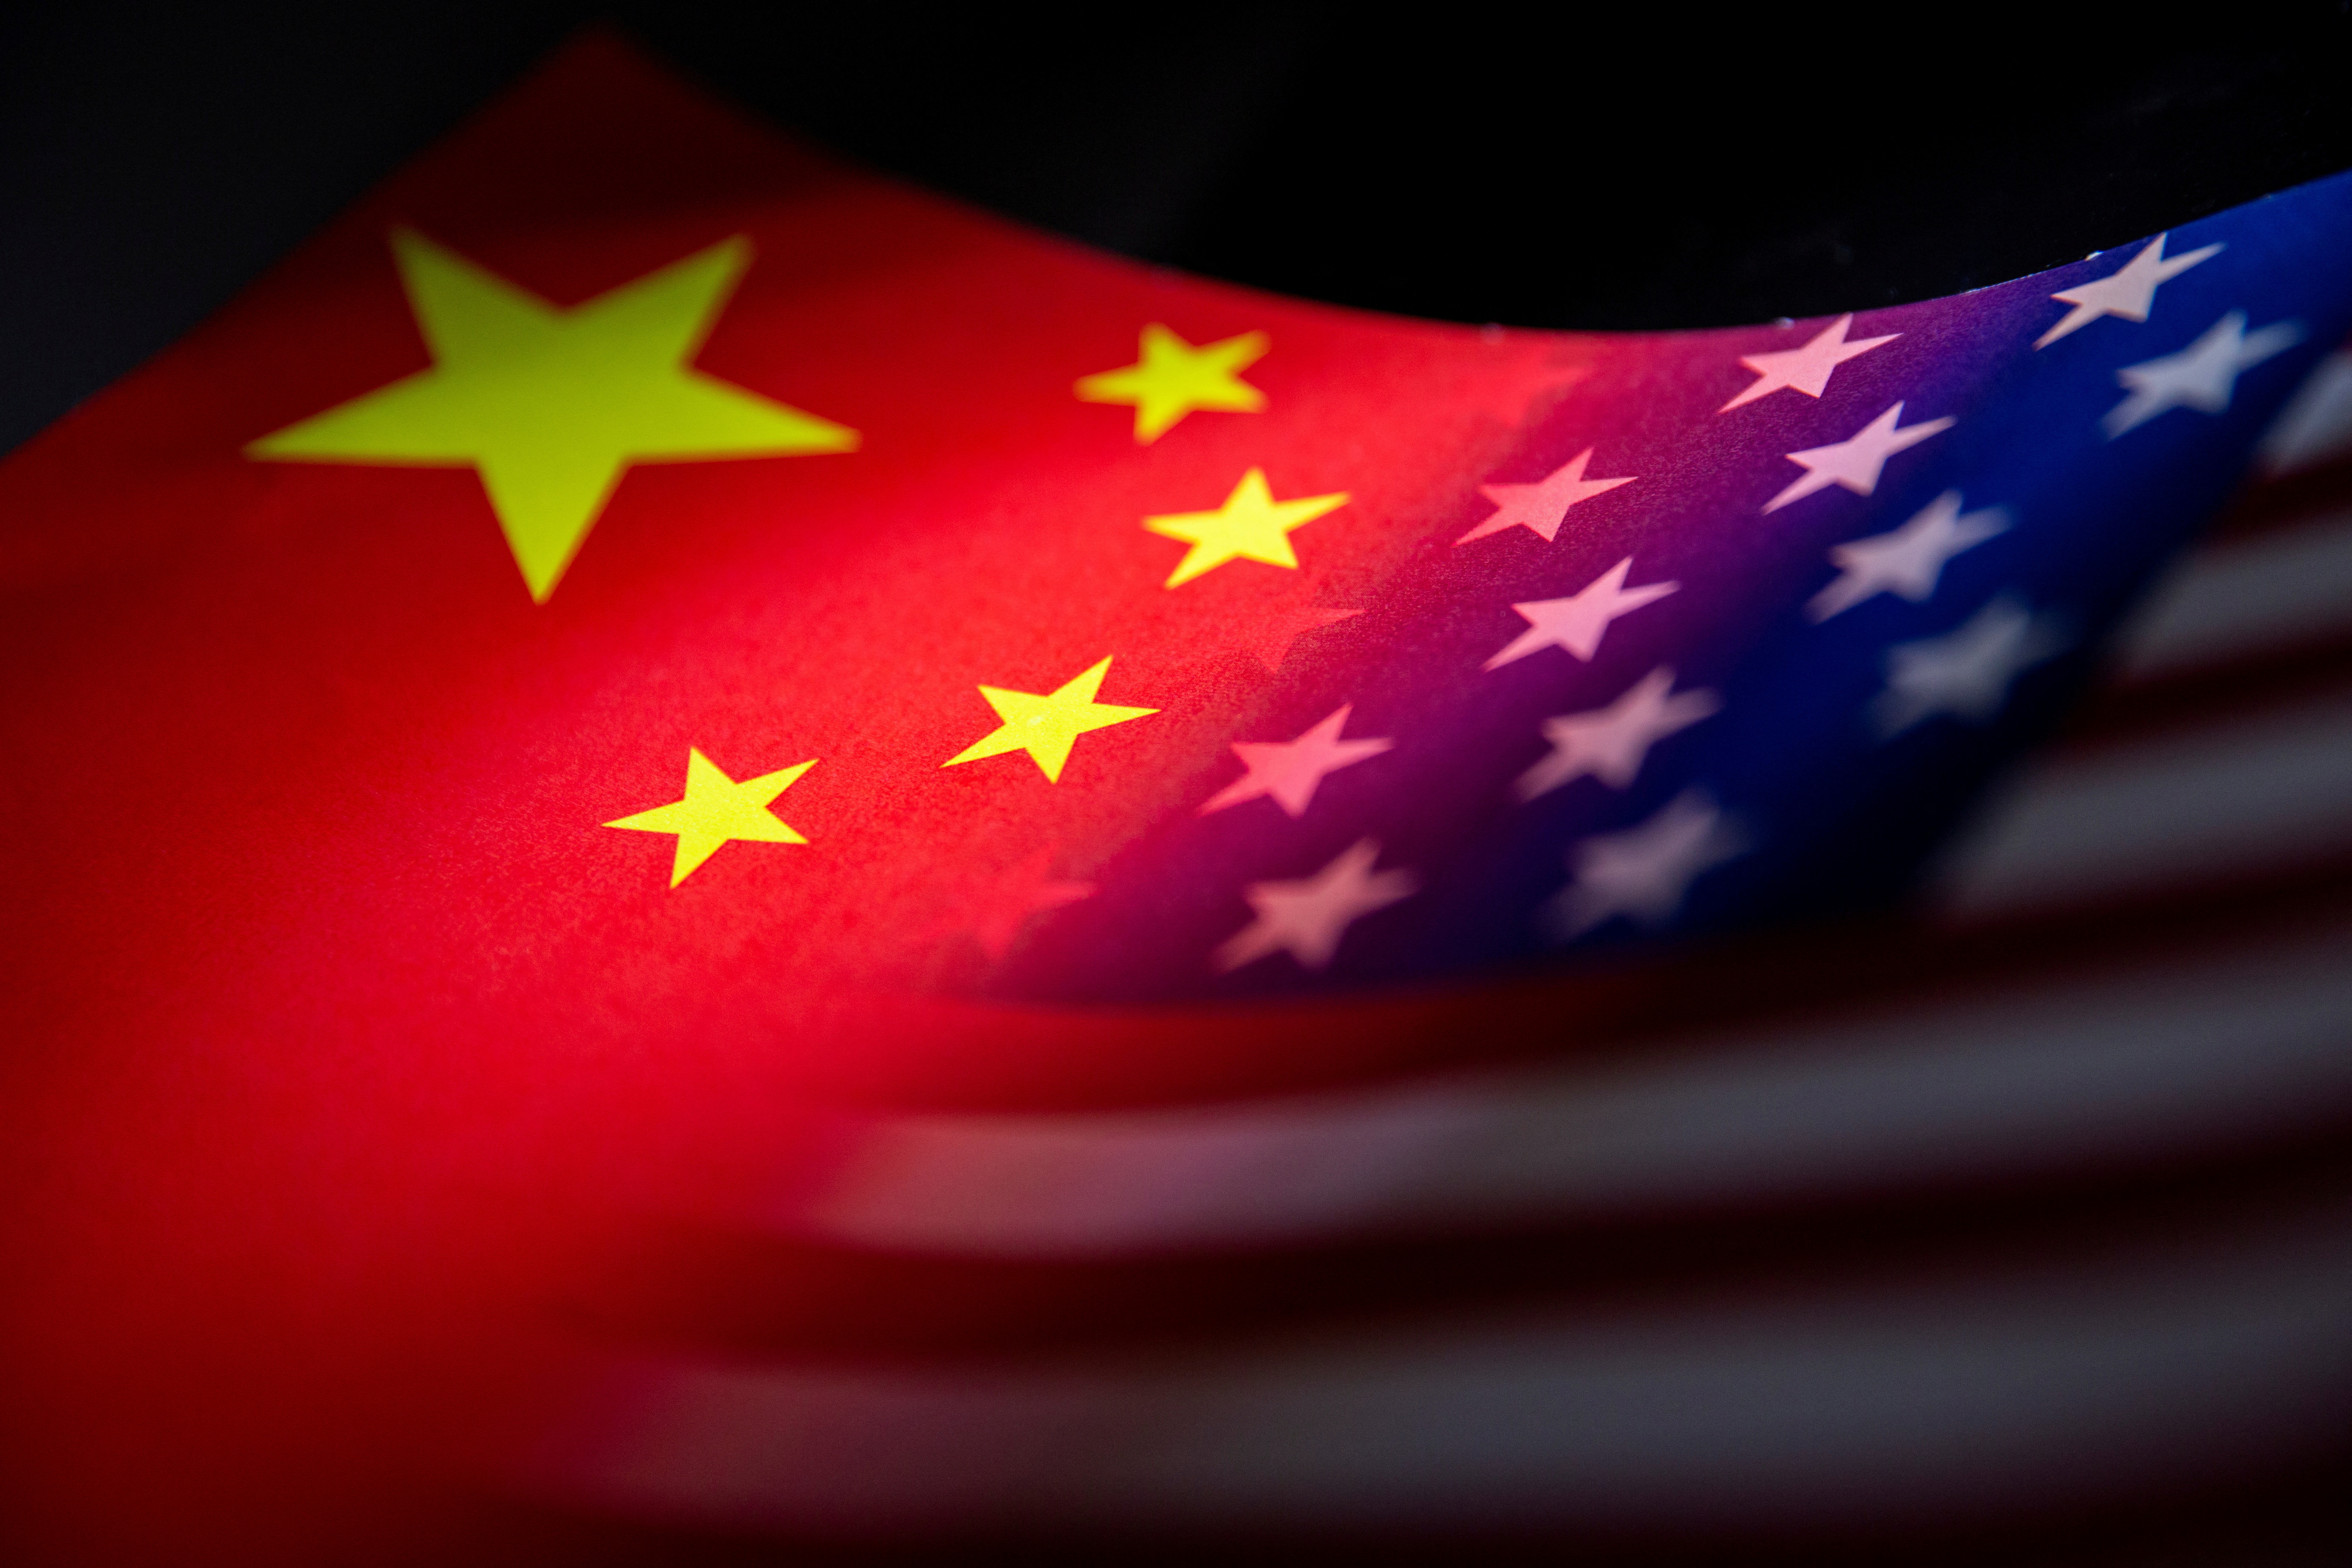 Illustration shows China's and U.S.' flags